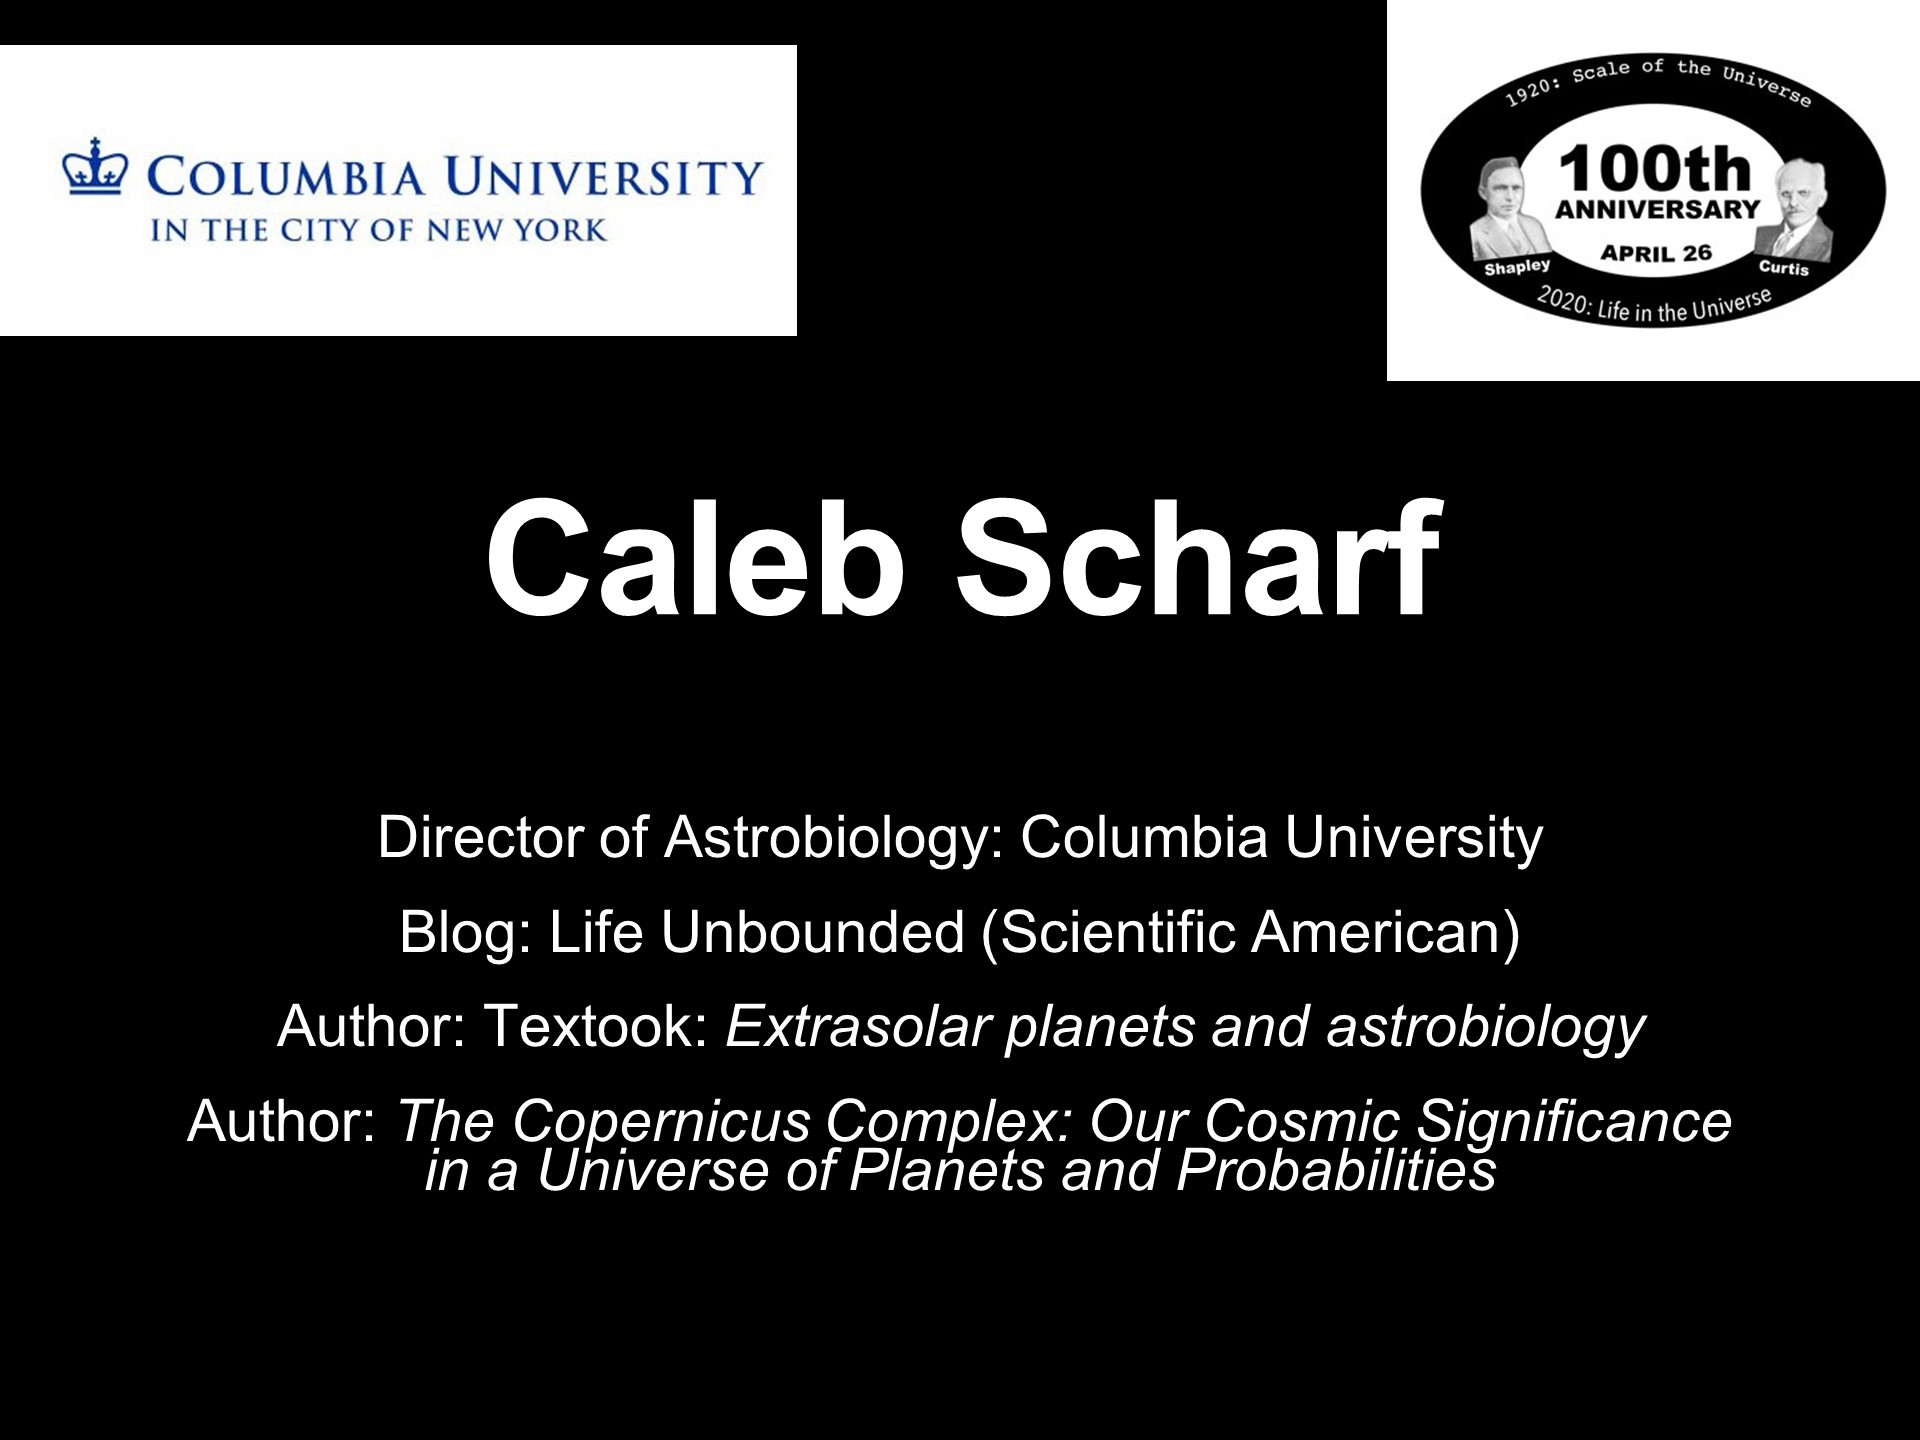 Caleb Scharf
Director of Astrobiology: Columbia University
Blog: Life Unbounded (Scientific American)
Author: Textook: Extrasolar planets and astrobiology
Author: The Copernicus Complex: Our Cosmic Significance in a Universe of Planets and Probabilities